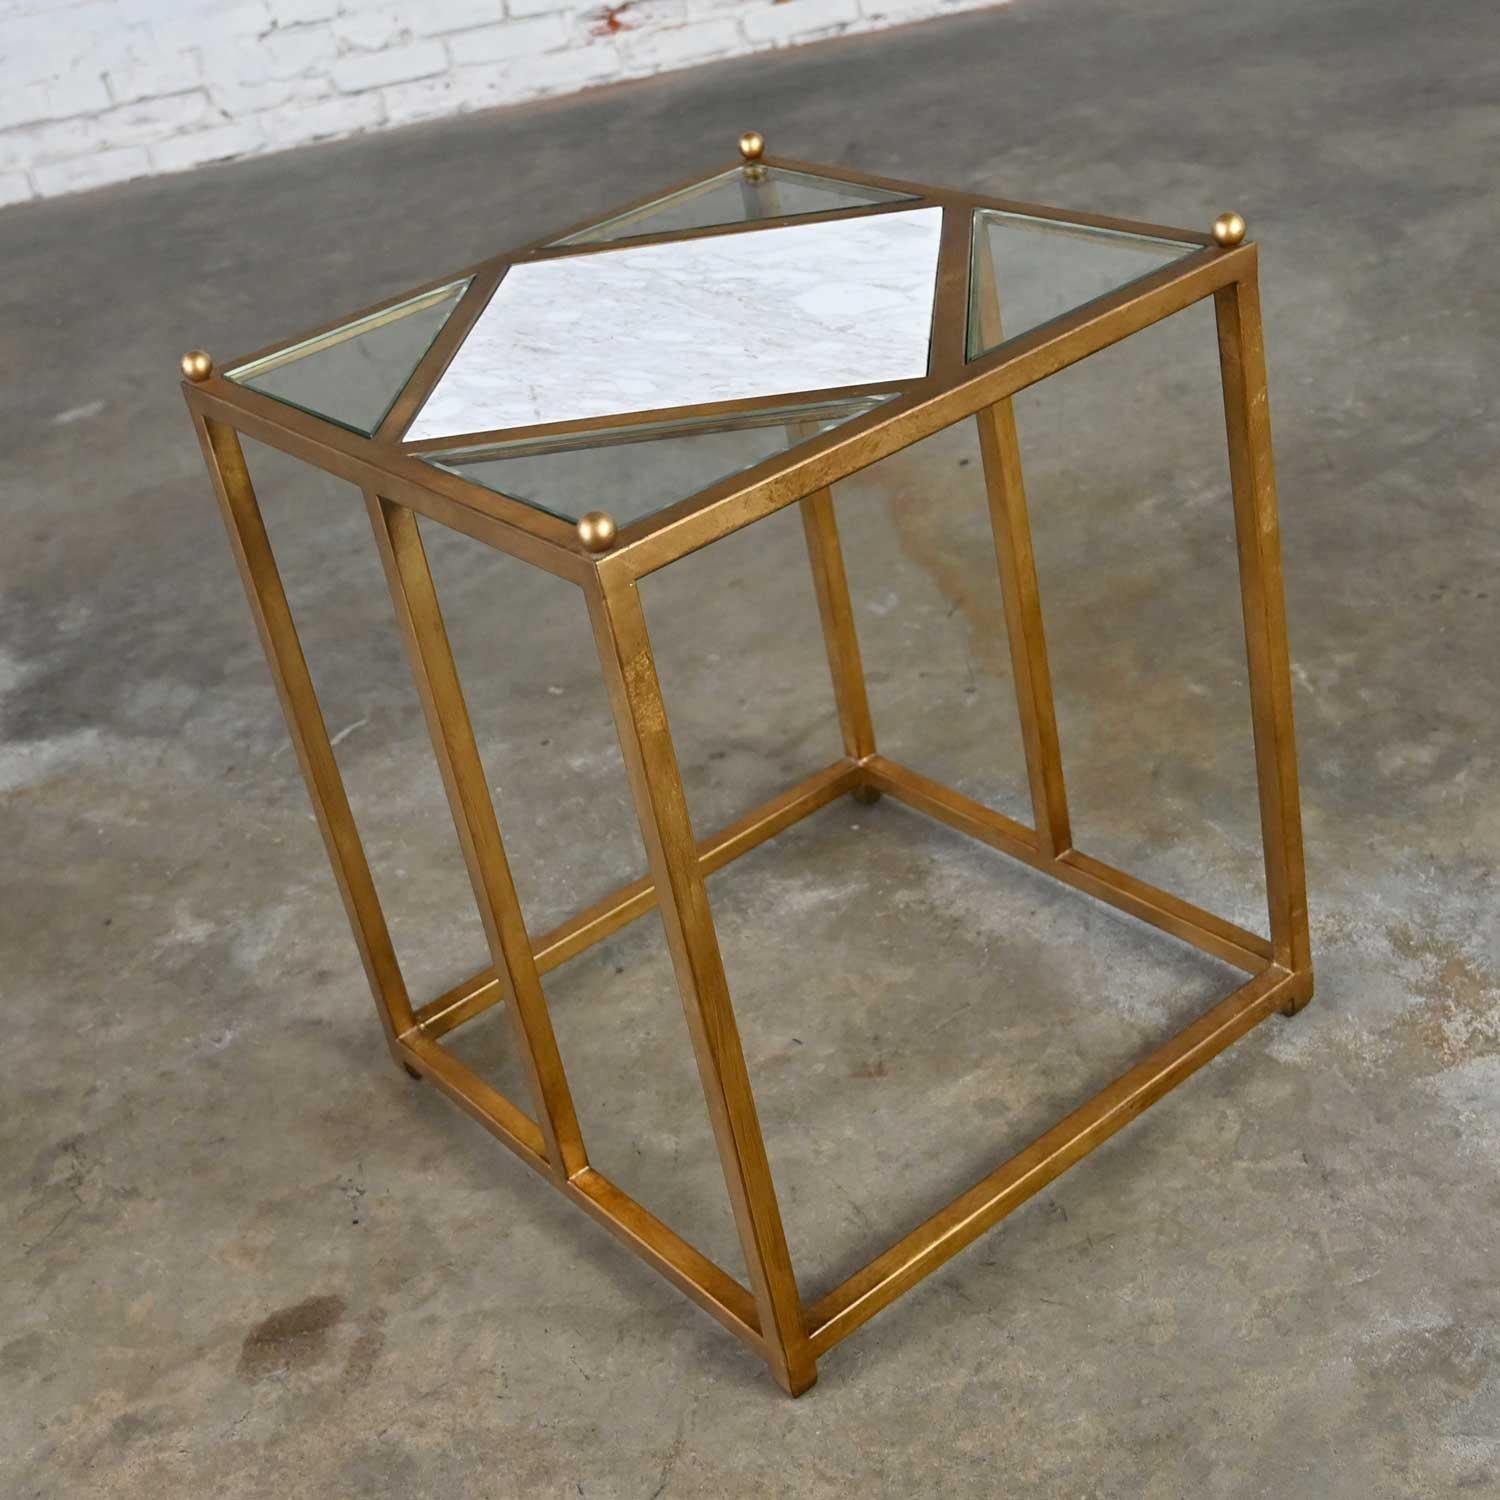 Gorgeous Chelsea House Jamie Merida Collection Harlequin side table comprised of antique gold leafed iron with white marble inlay and glass top. Beautiful condition, keeping in mind that this is vintage and not new so will have signs of use and